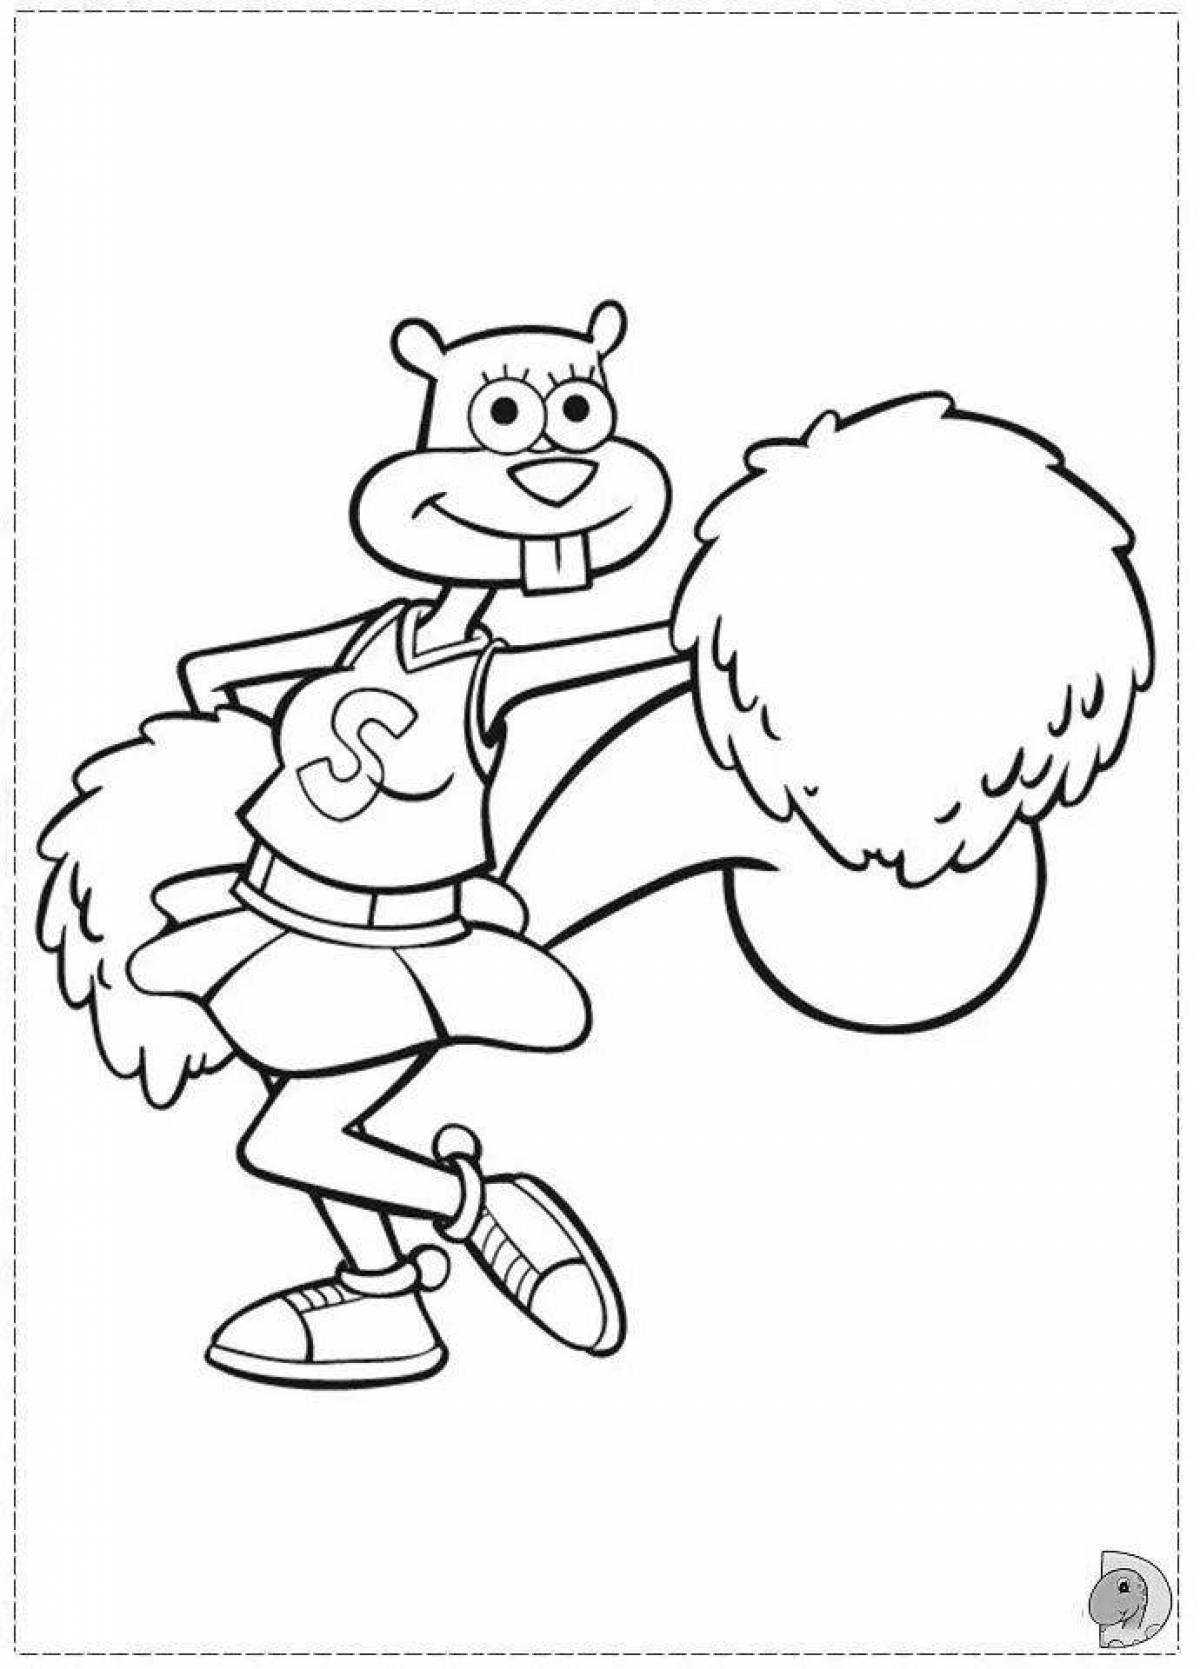 Glowing sandy coloring page